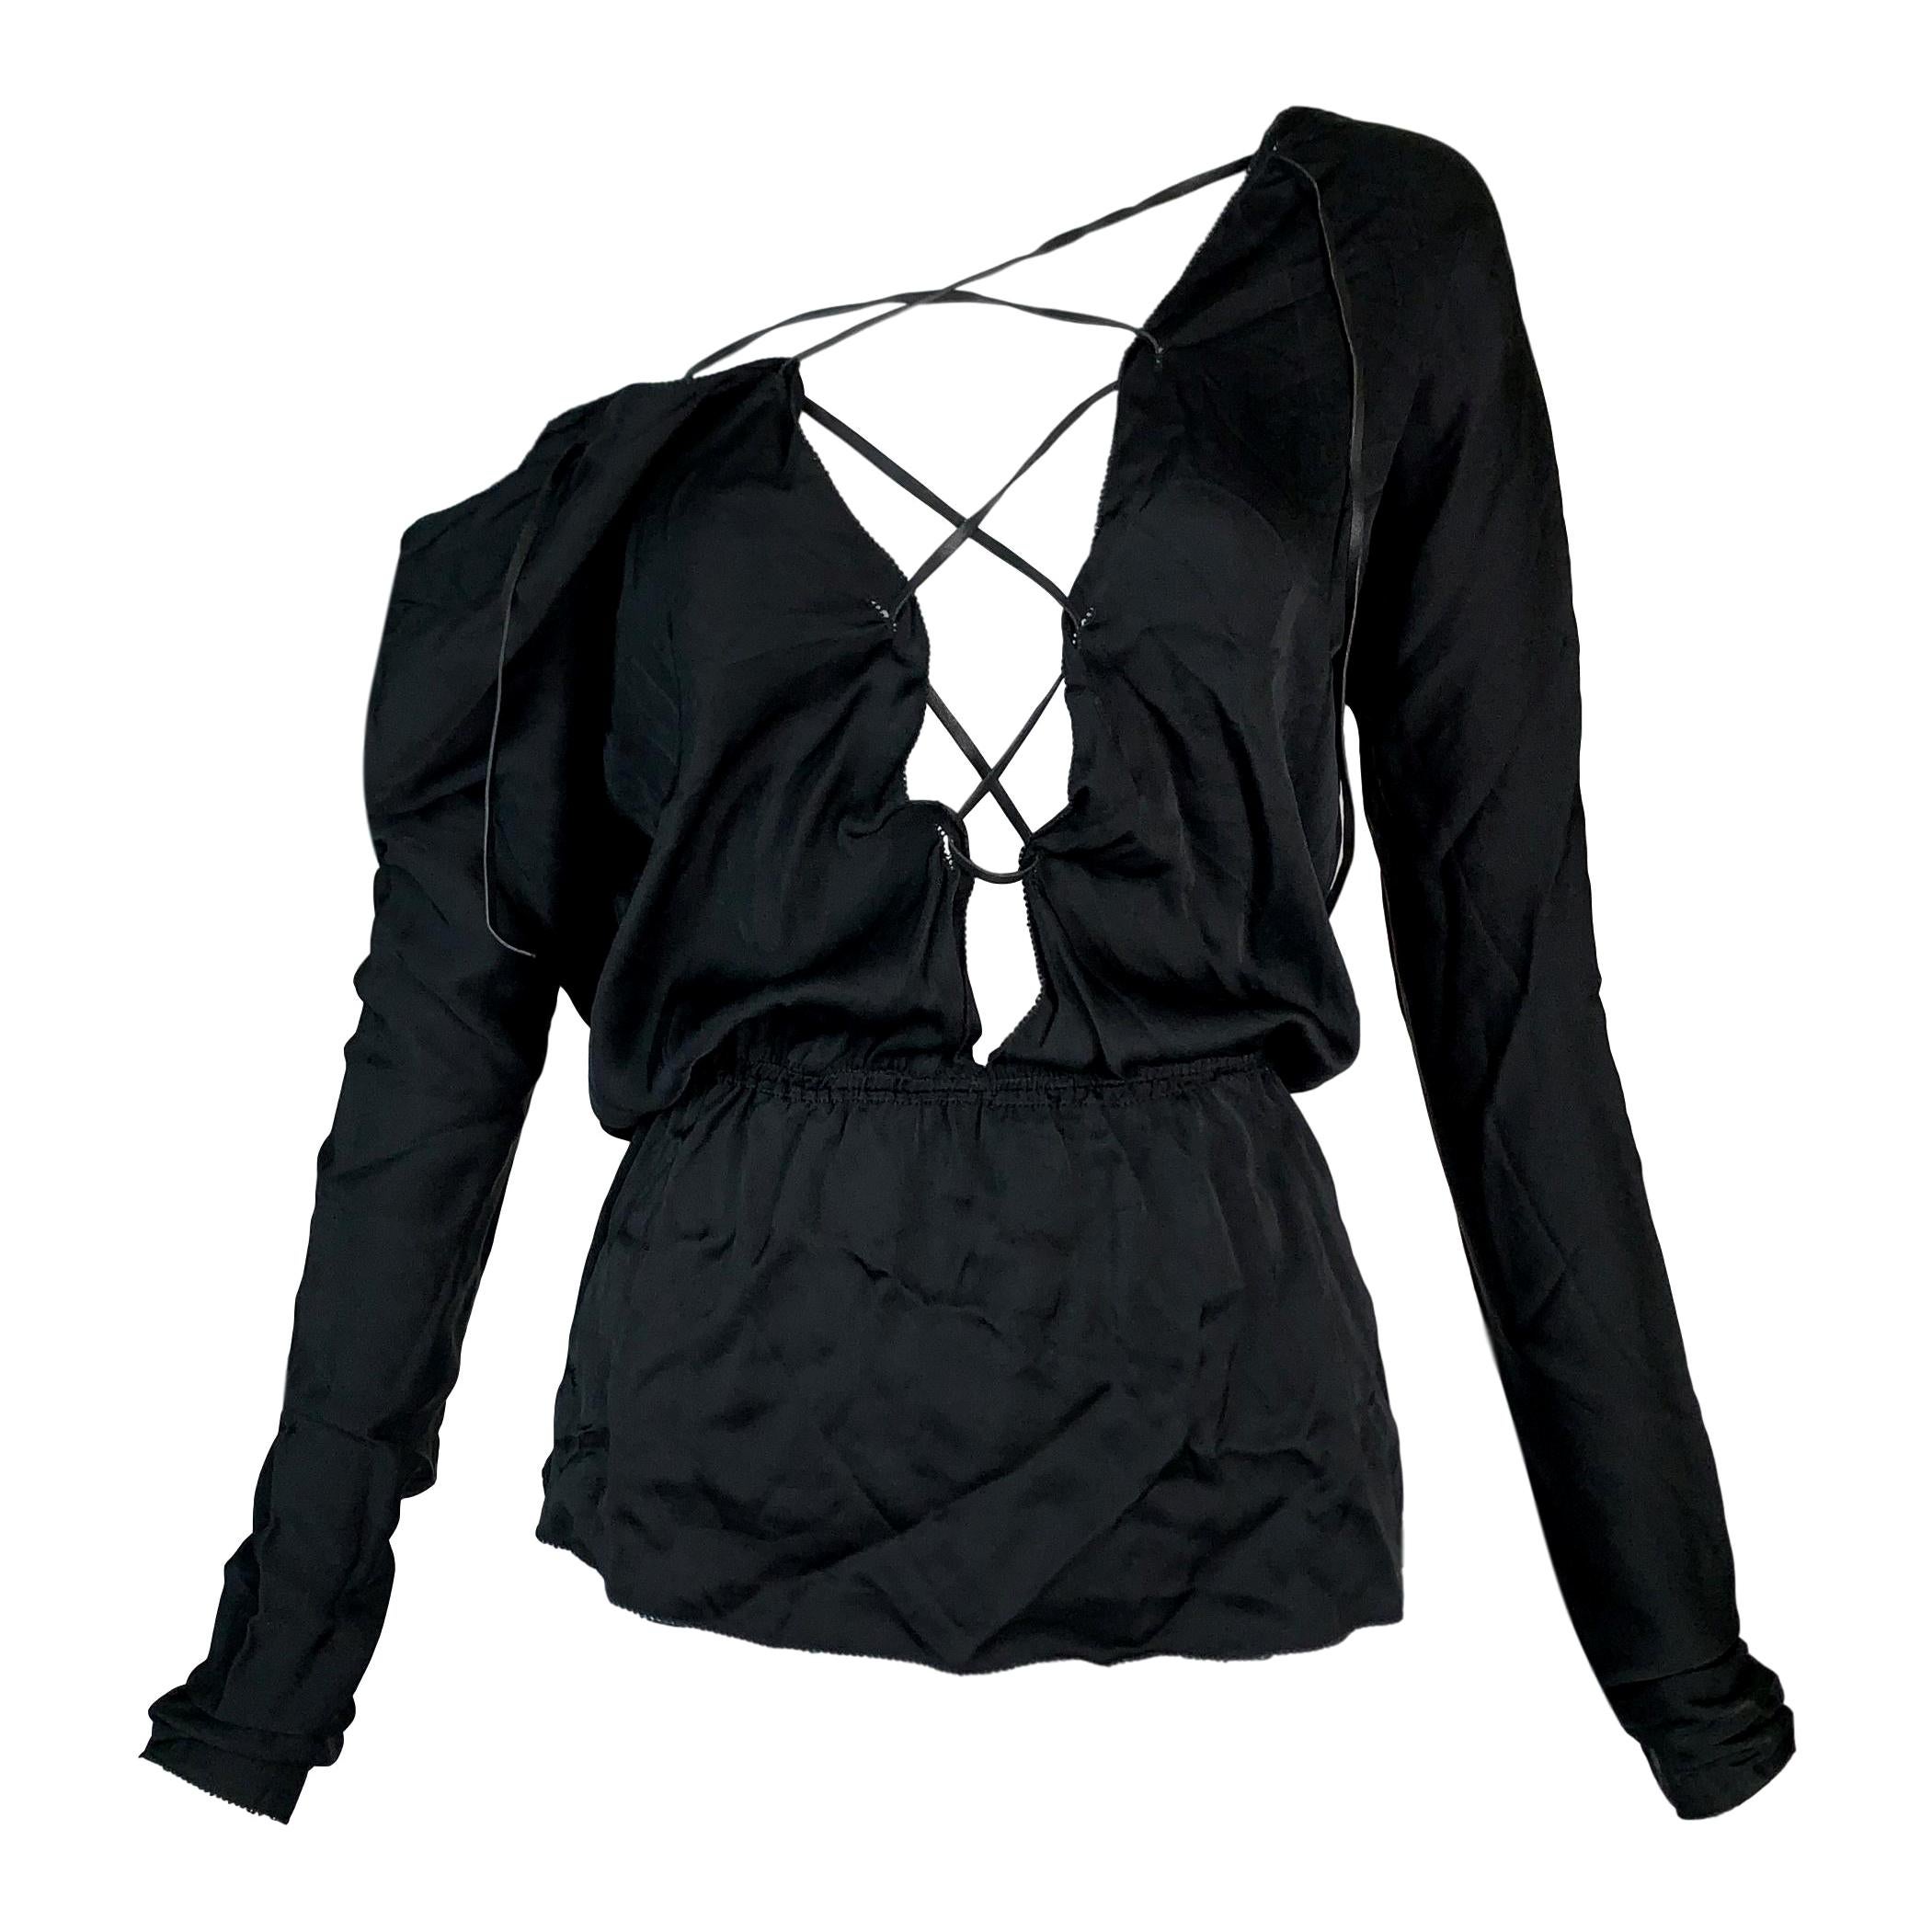 2002 Gucci Tom Ford Black Silk Plunging Lace-Up Backless Top Blouse